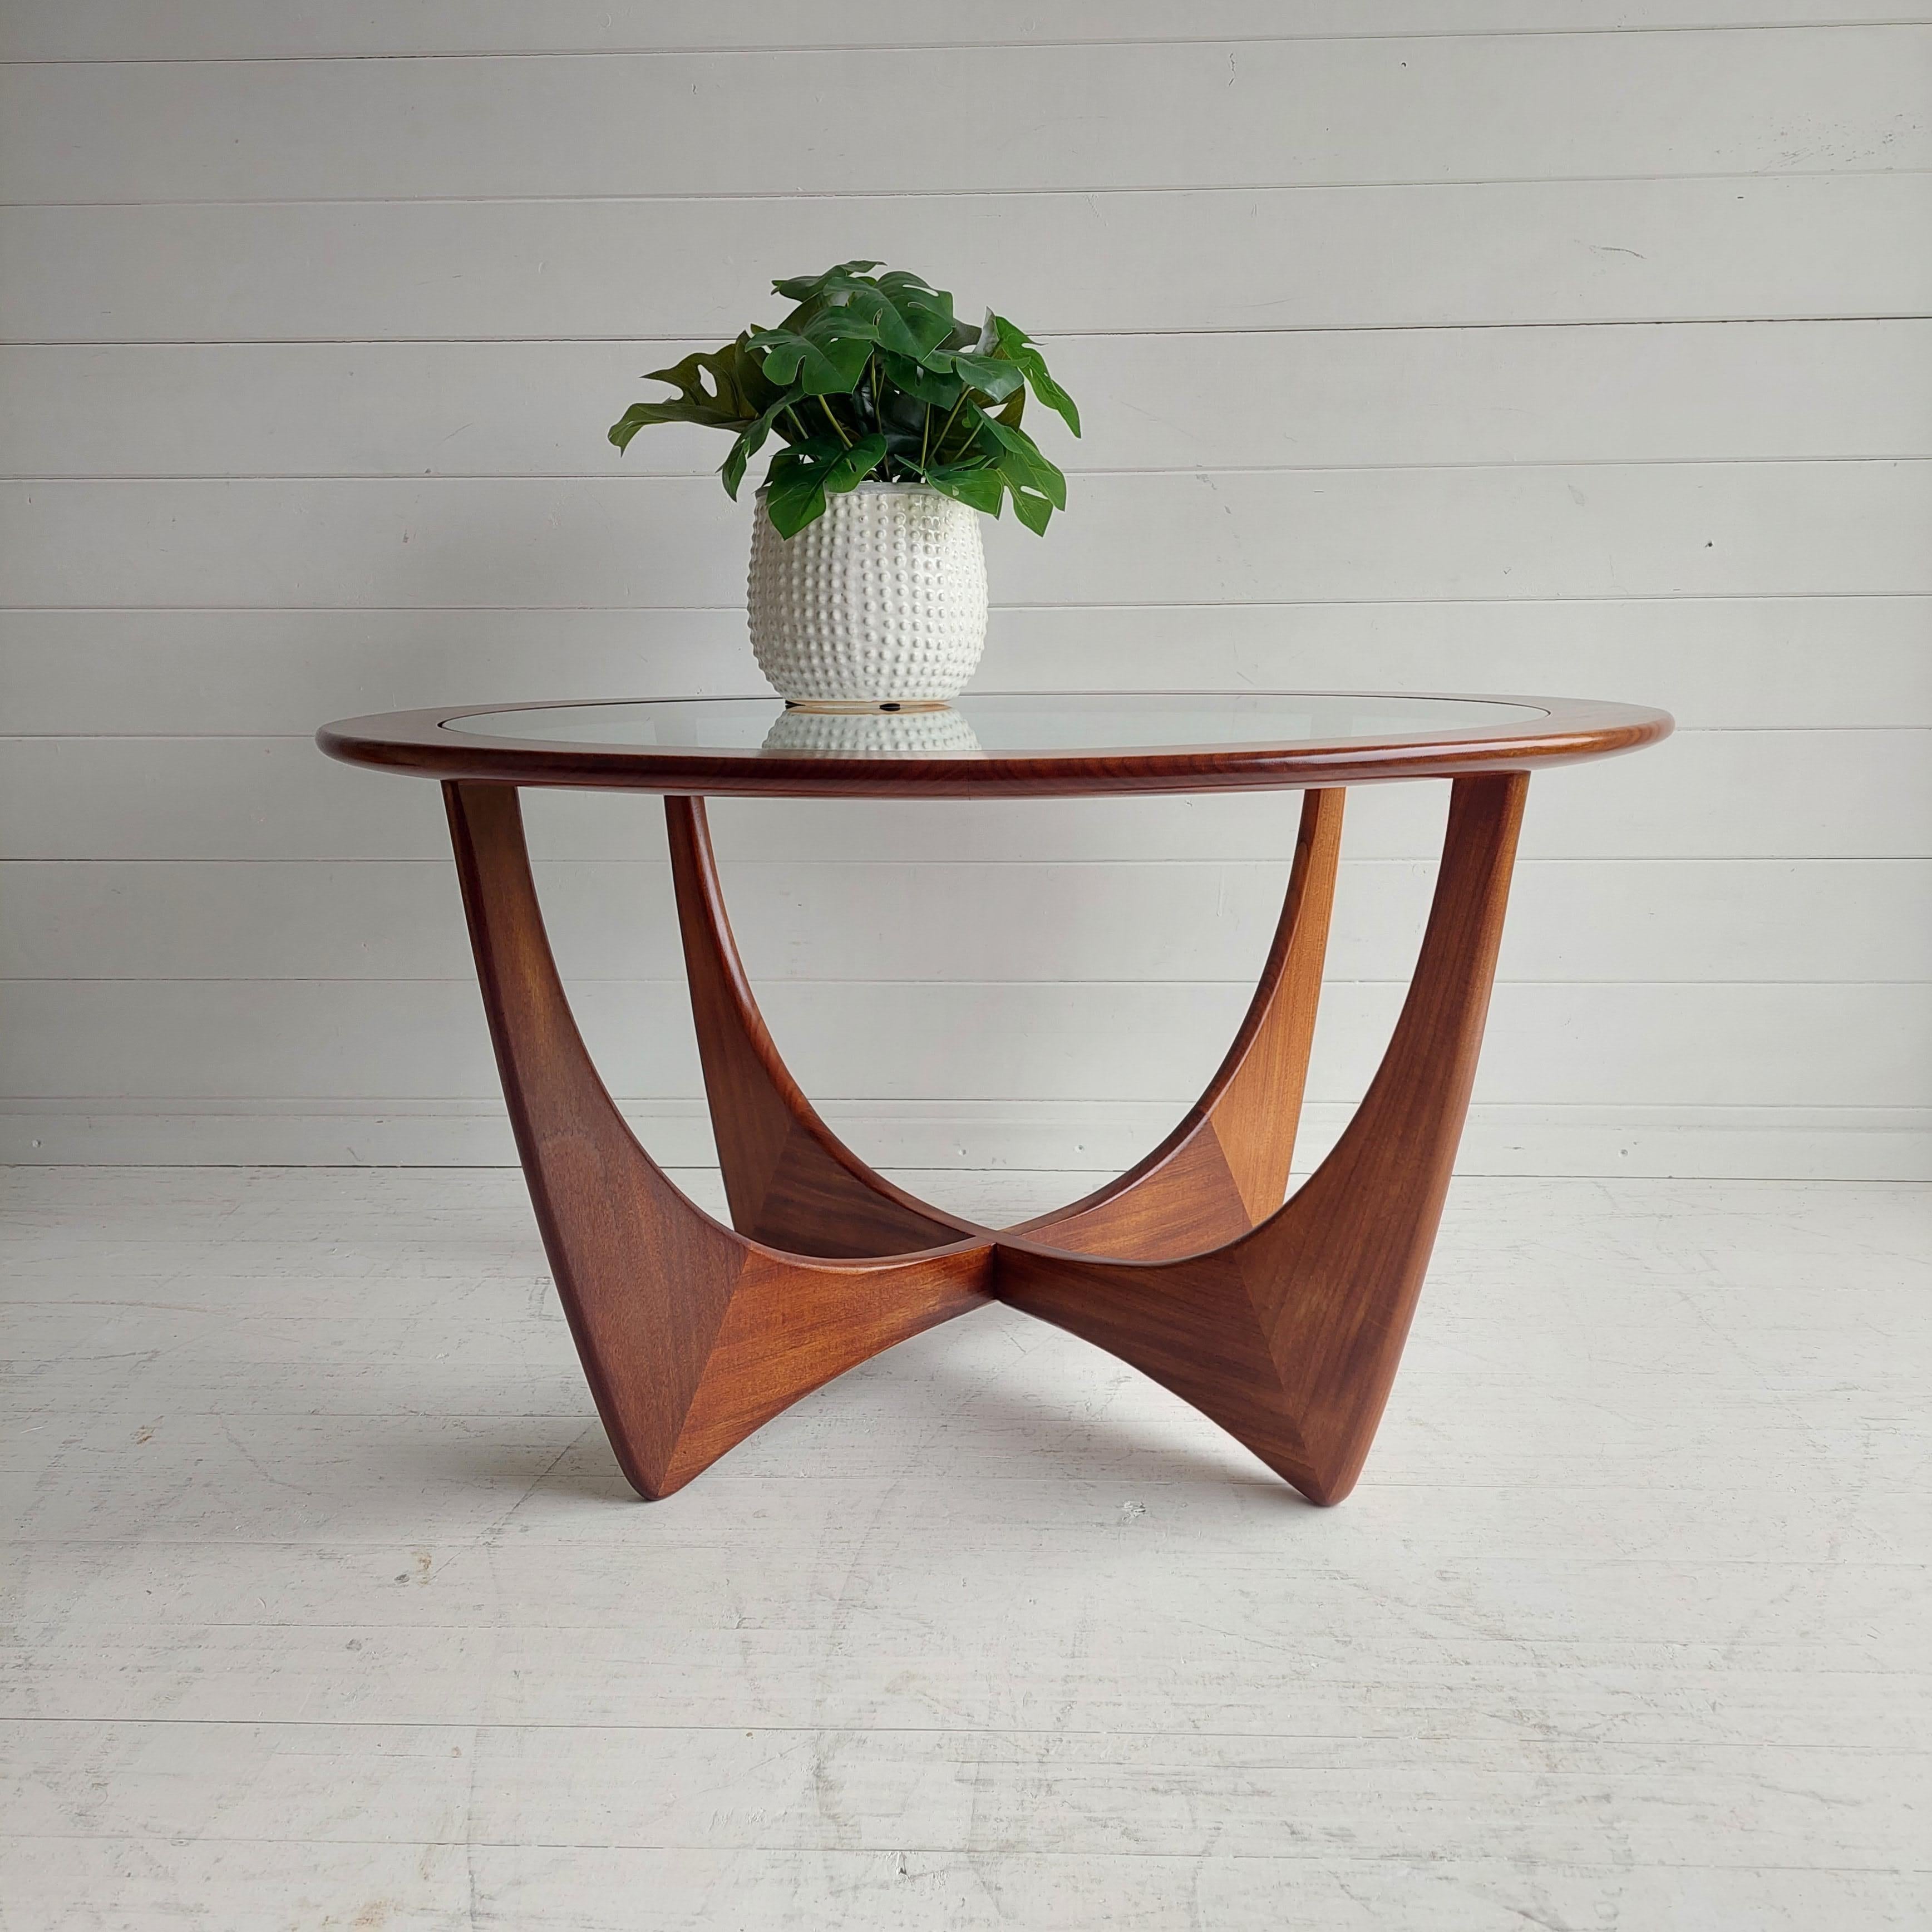 G Plan astro style teak and glass round coffee table dating from the 1960s or 1970s.
Teak Afrormosia G Plan circular coffee table designed by Victor Wilkins designed circa 1969. 
Often referred to as the Astro coffee table this is such a shapely